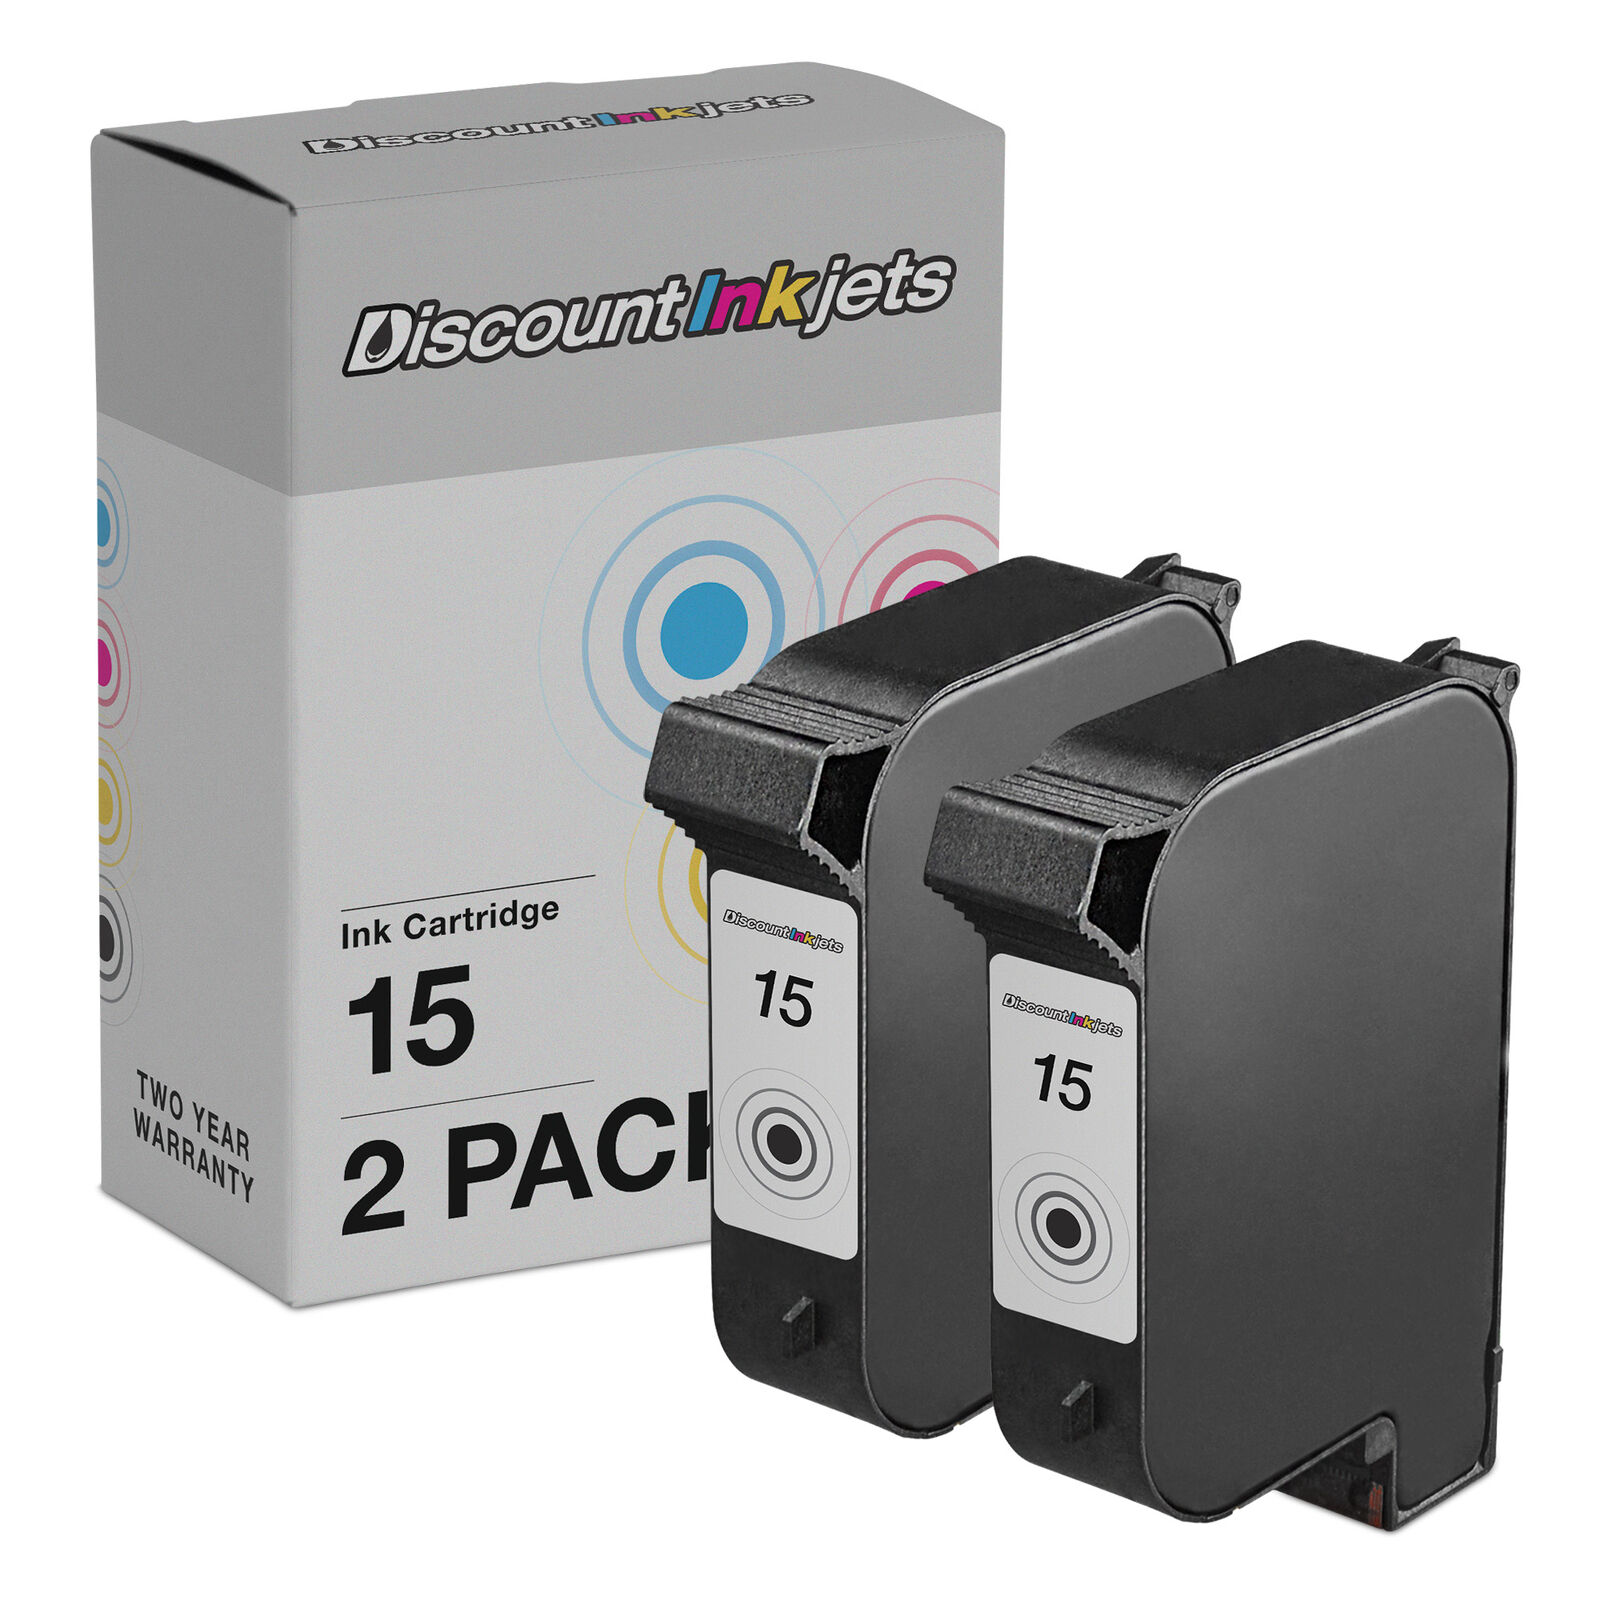 Ink Cartridge Replacement for HP 15 C6615DN (Black, 2-Pack)